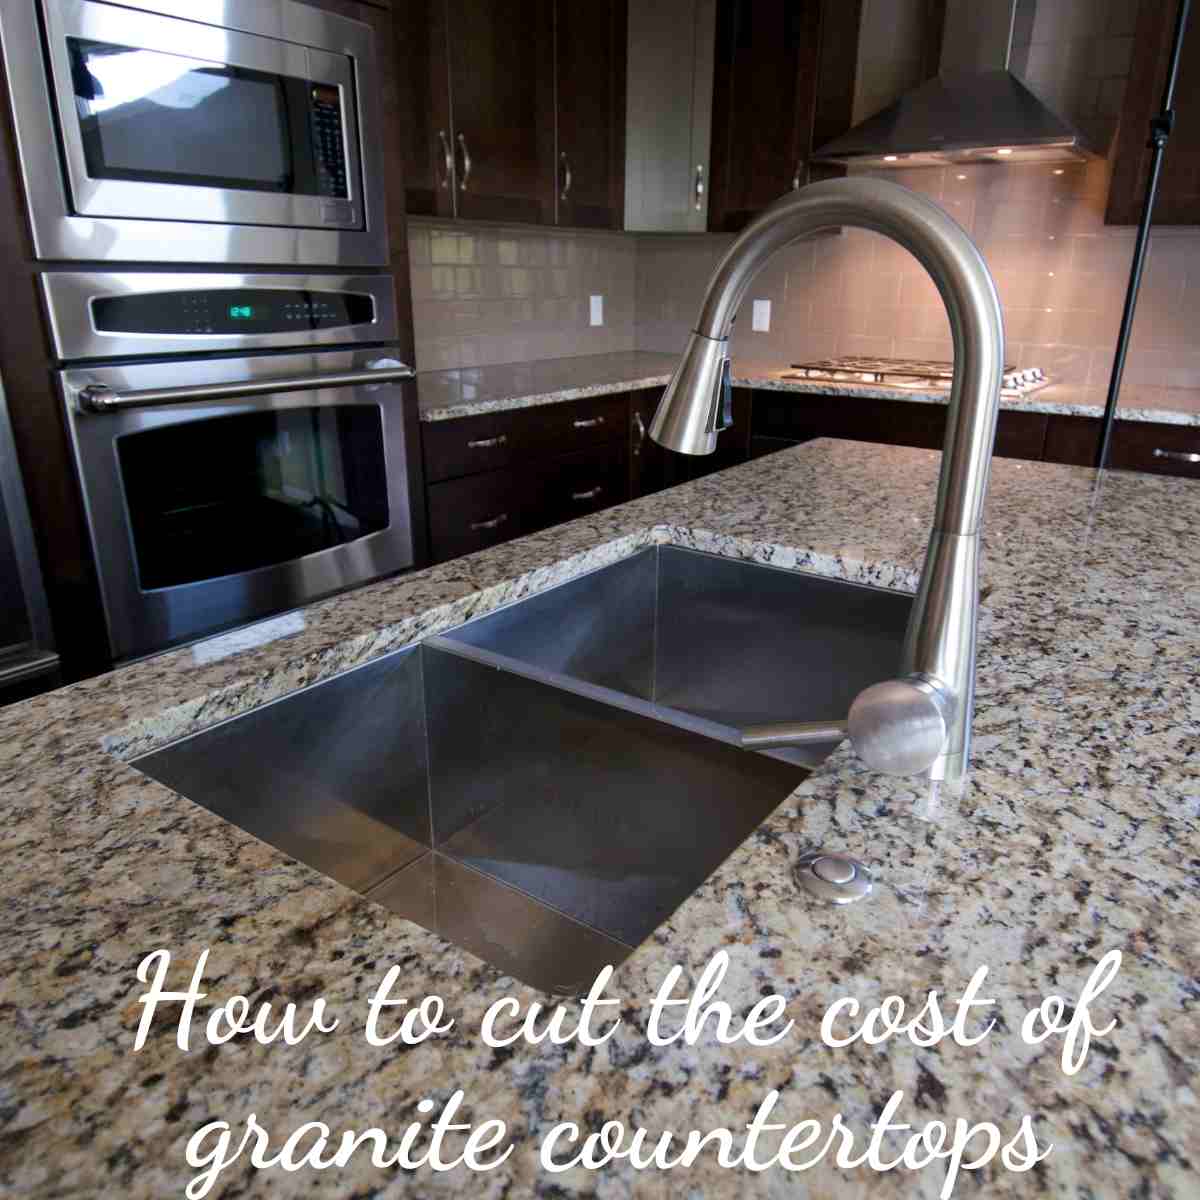 How To Cut The Cost of Granite Countertops